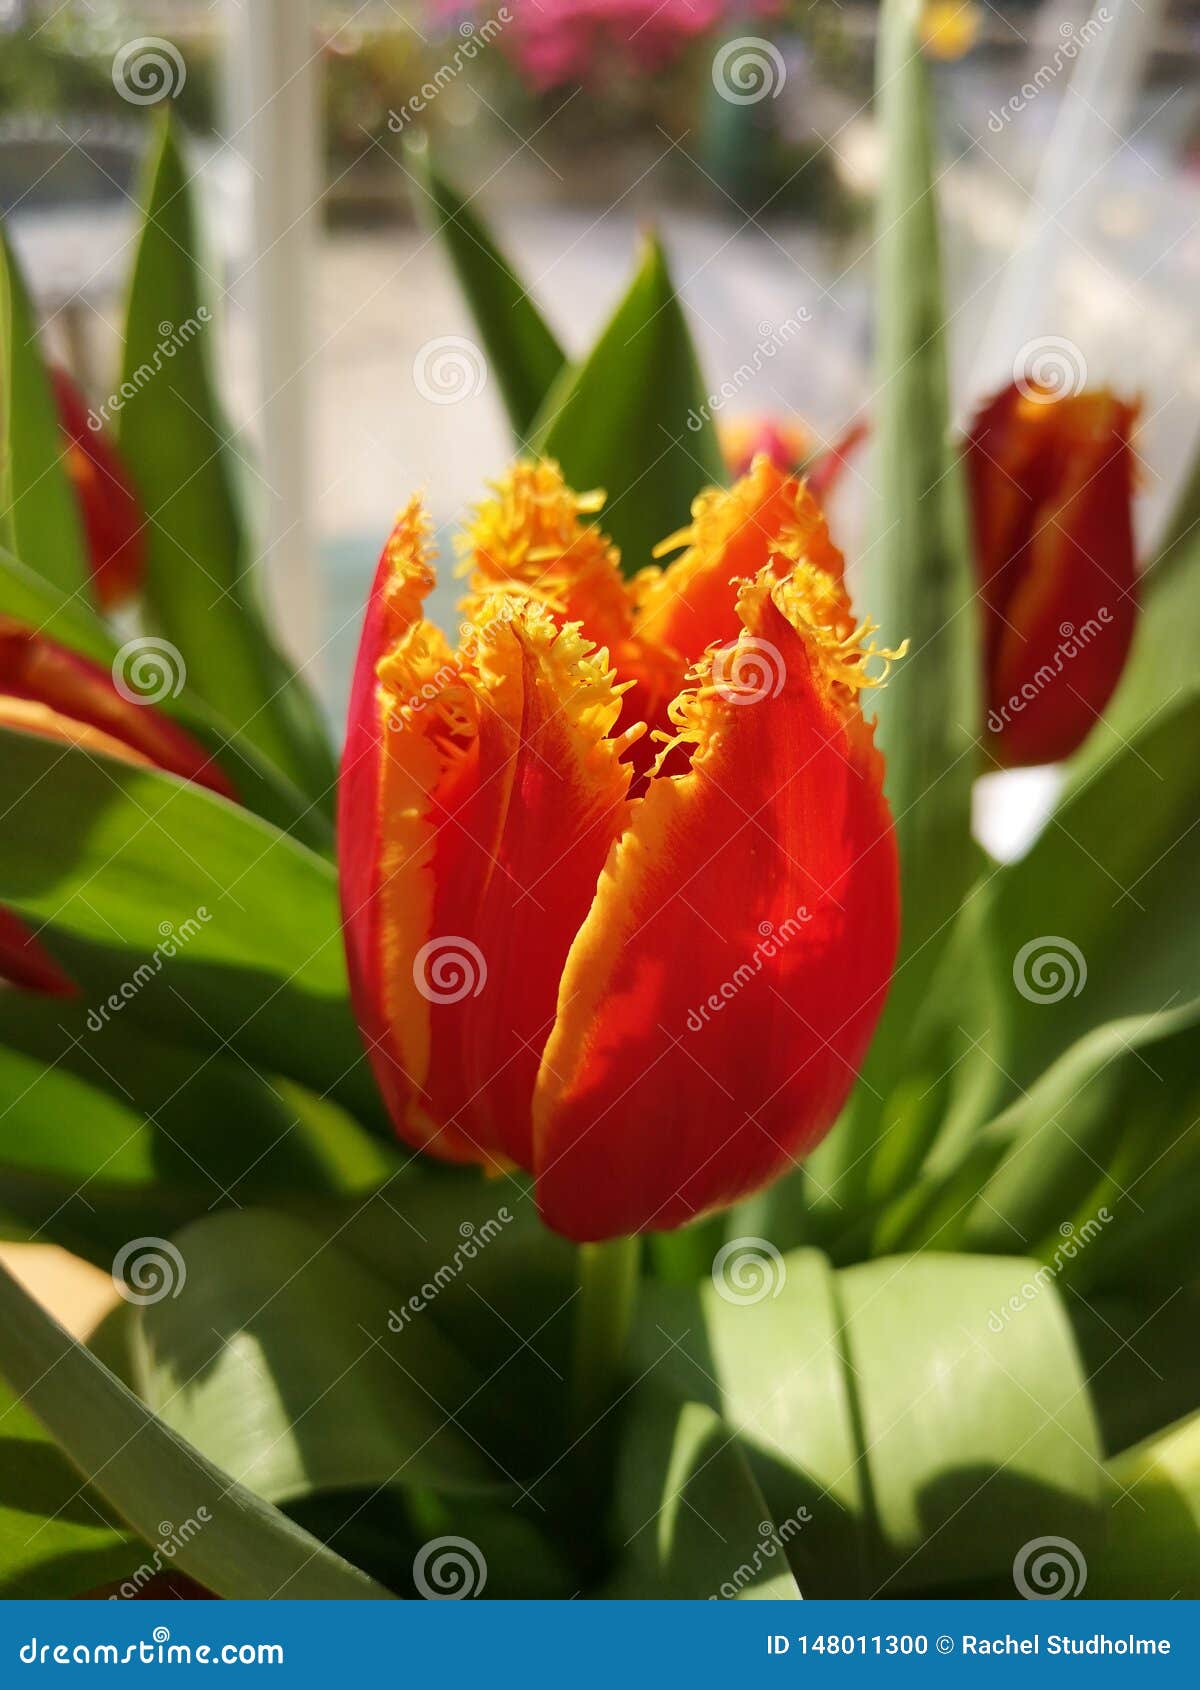 Red and yellow tulip stock photo. Image of nature, flowers ...